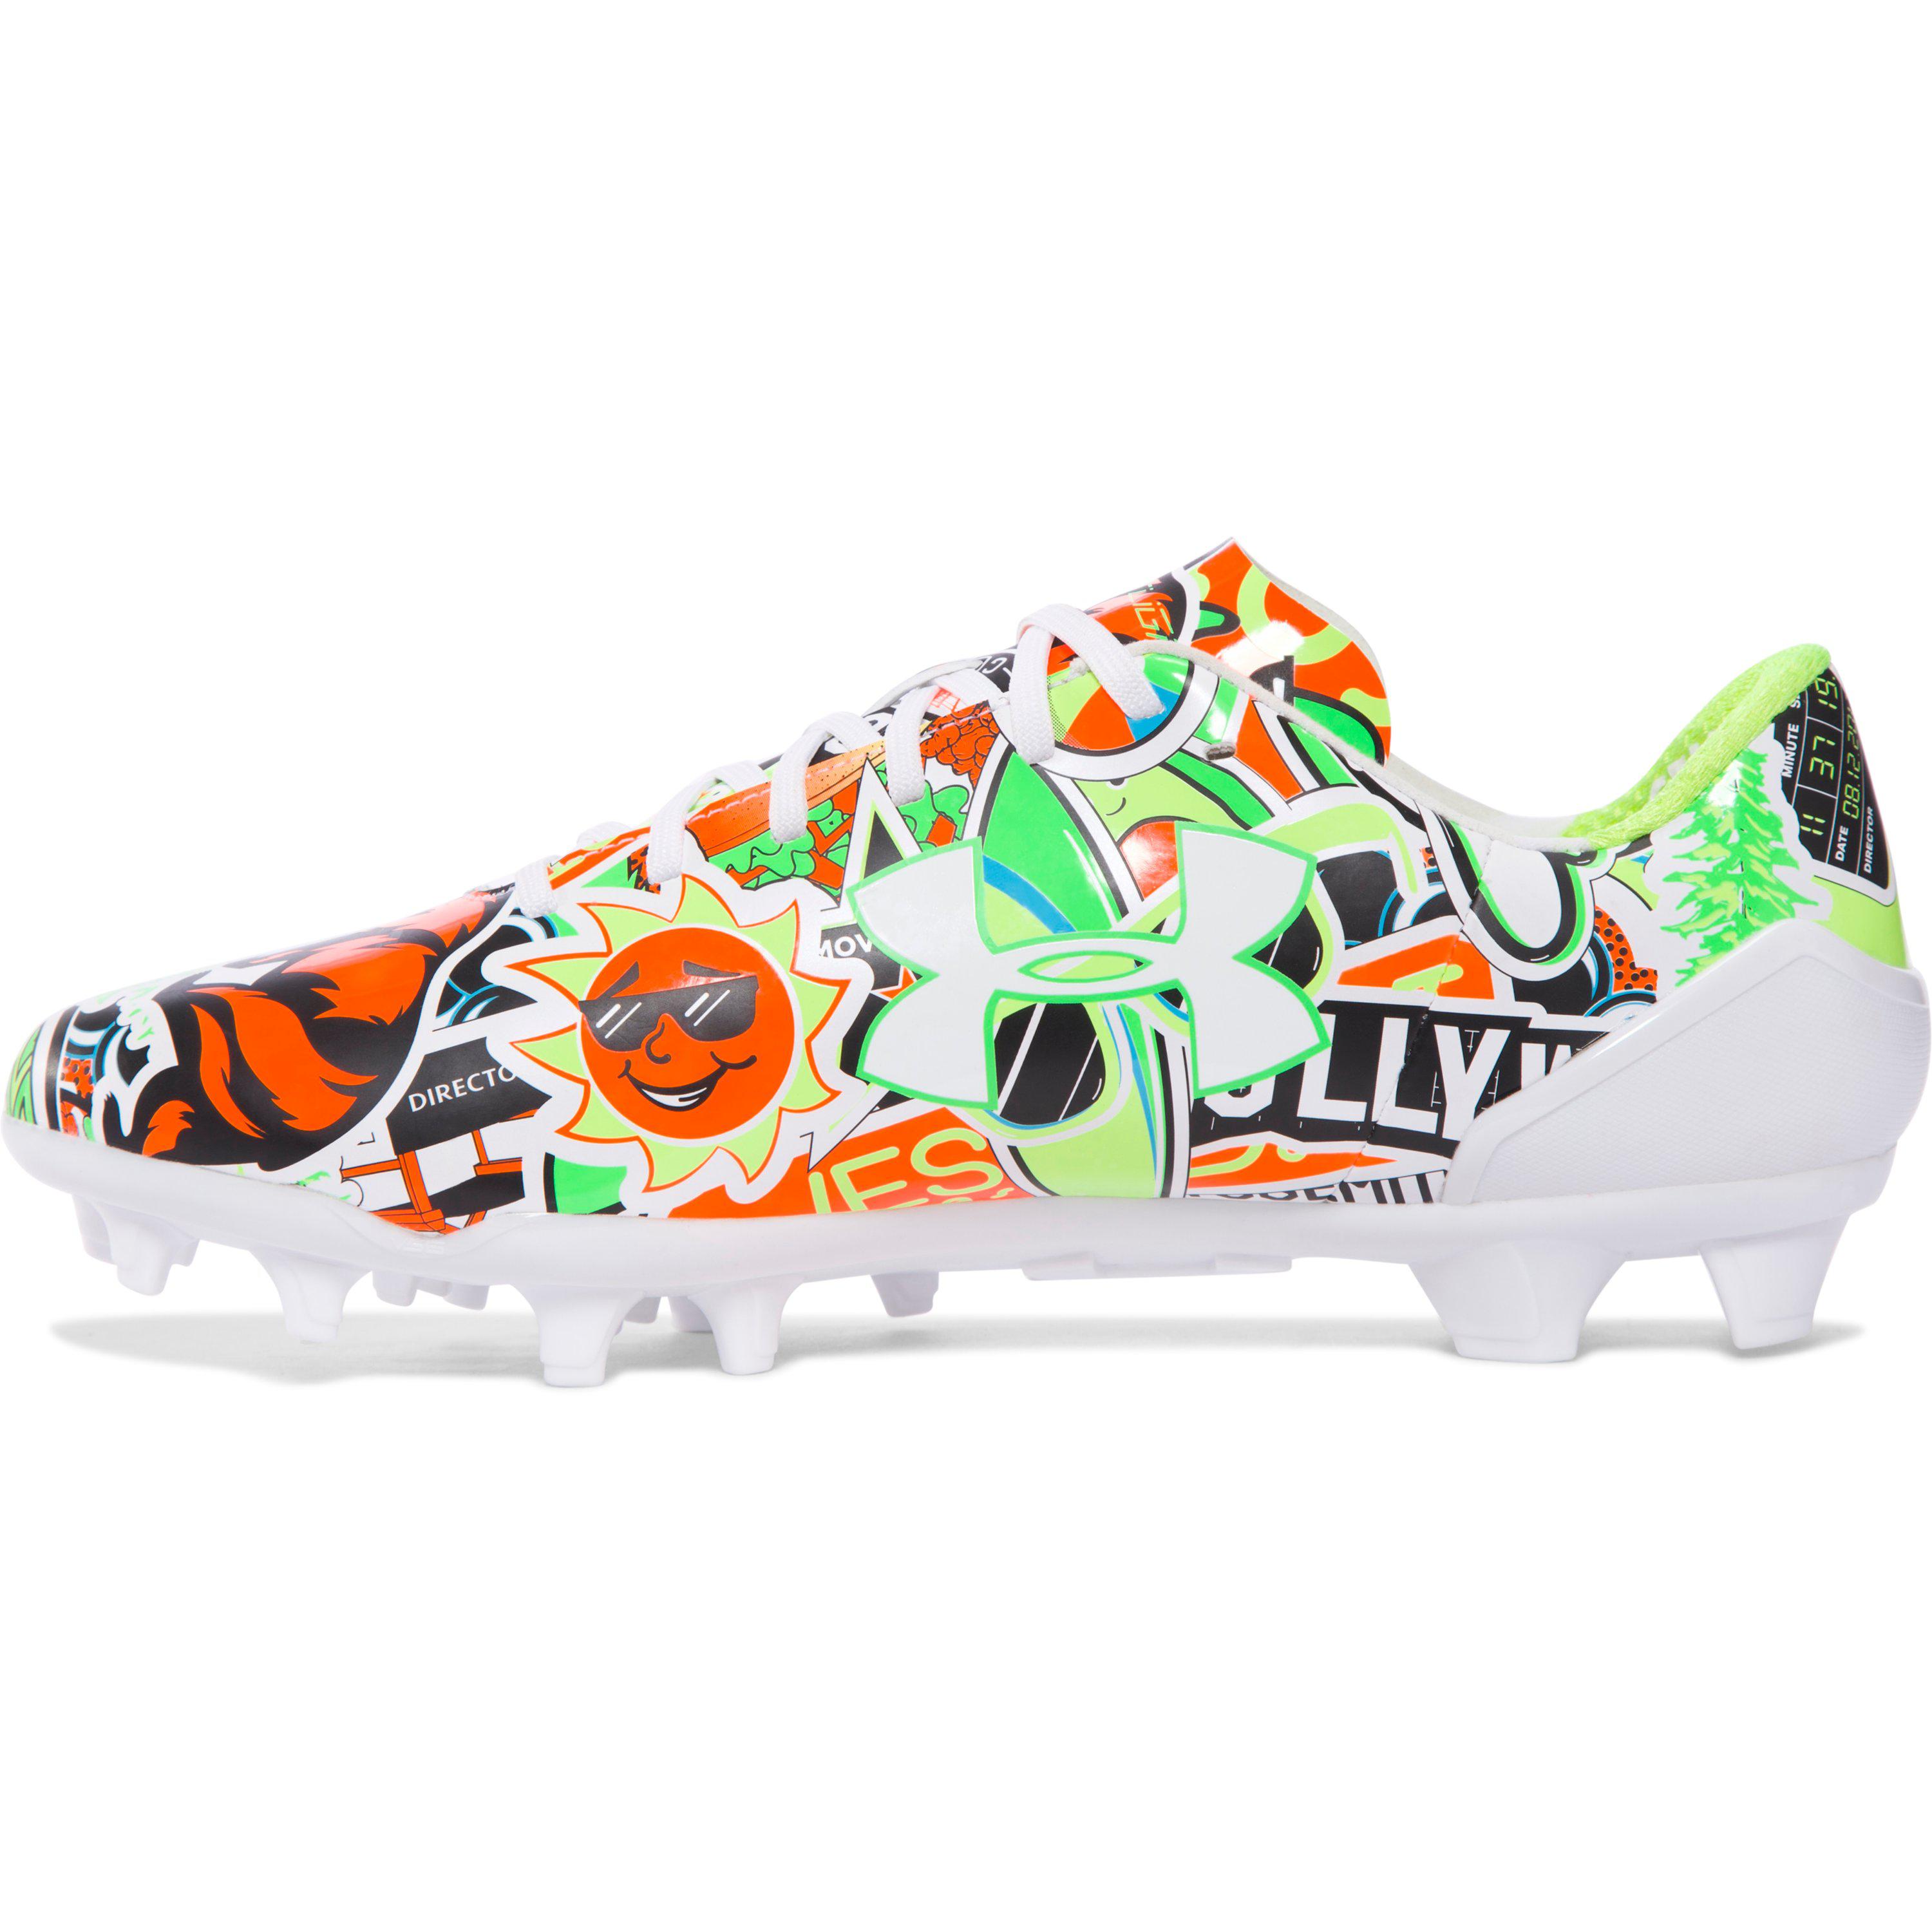 Under Armour Spotlight Mens Football Cleats AMERICA Limited Edition 1290956 076 